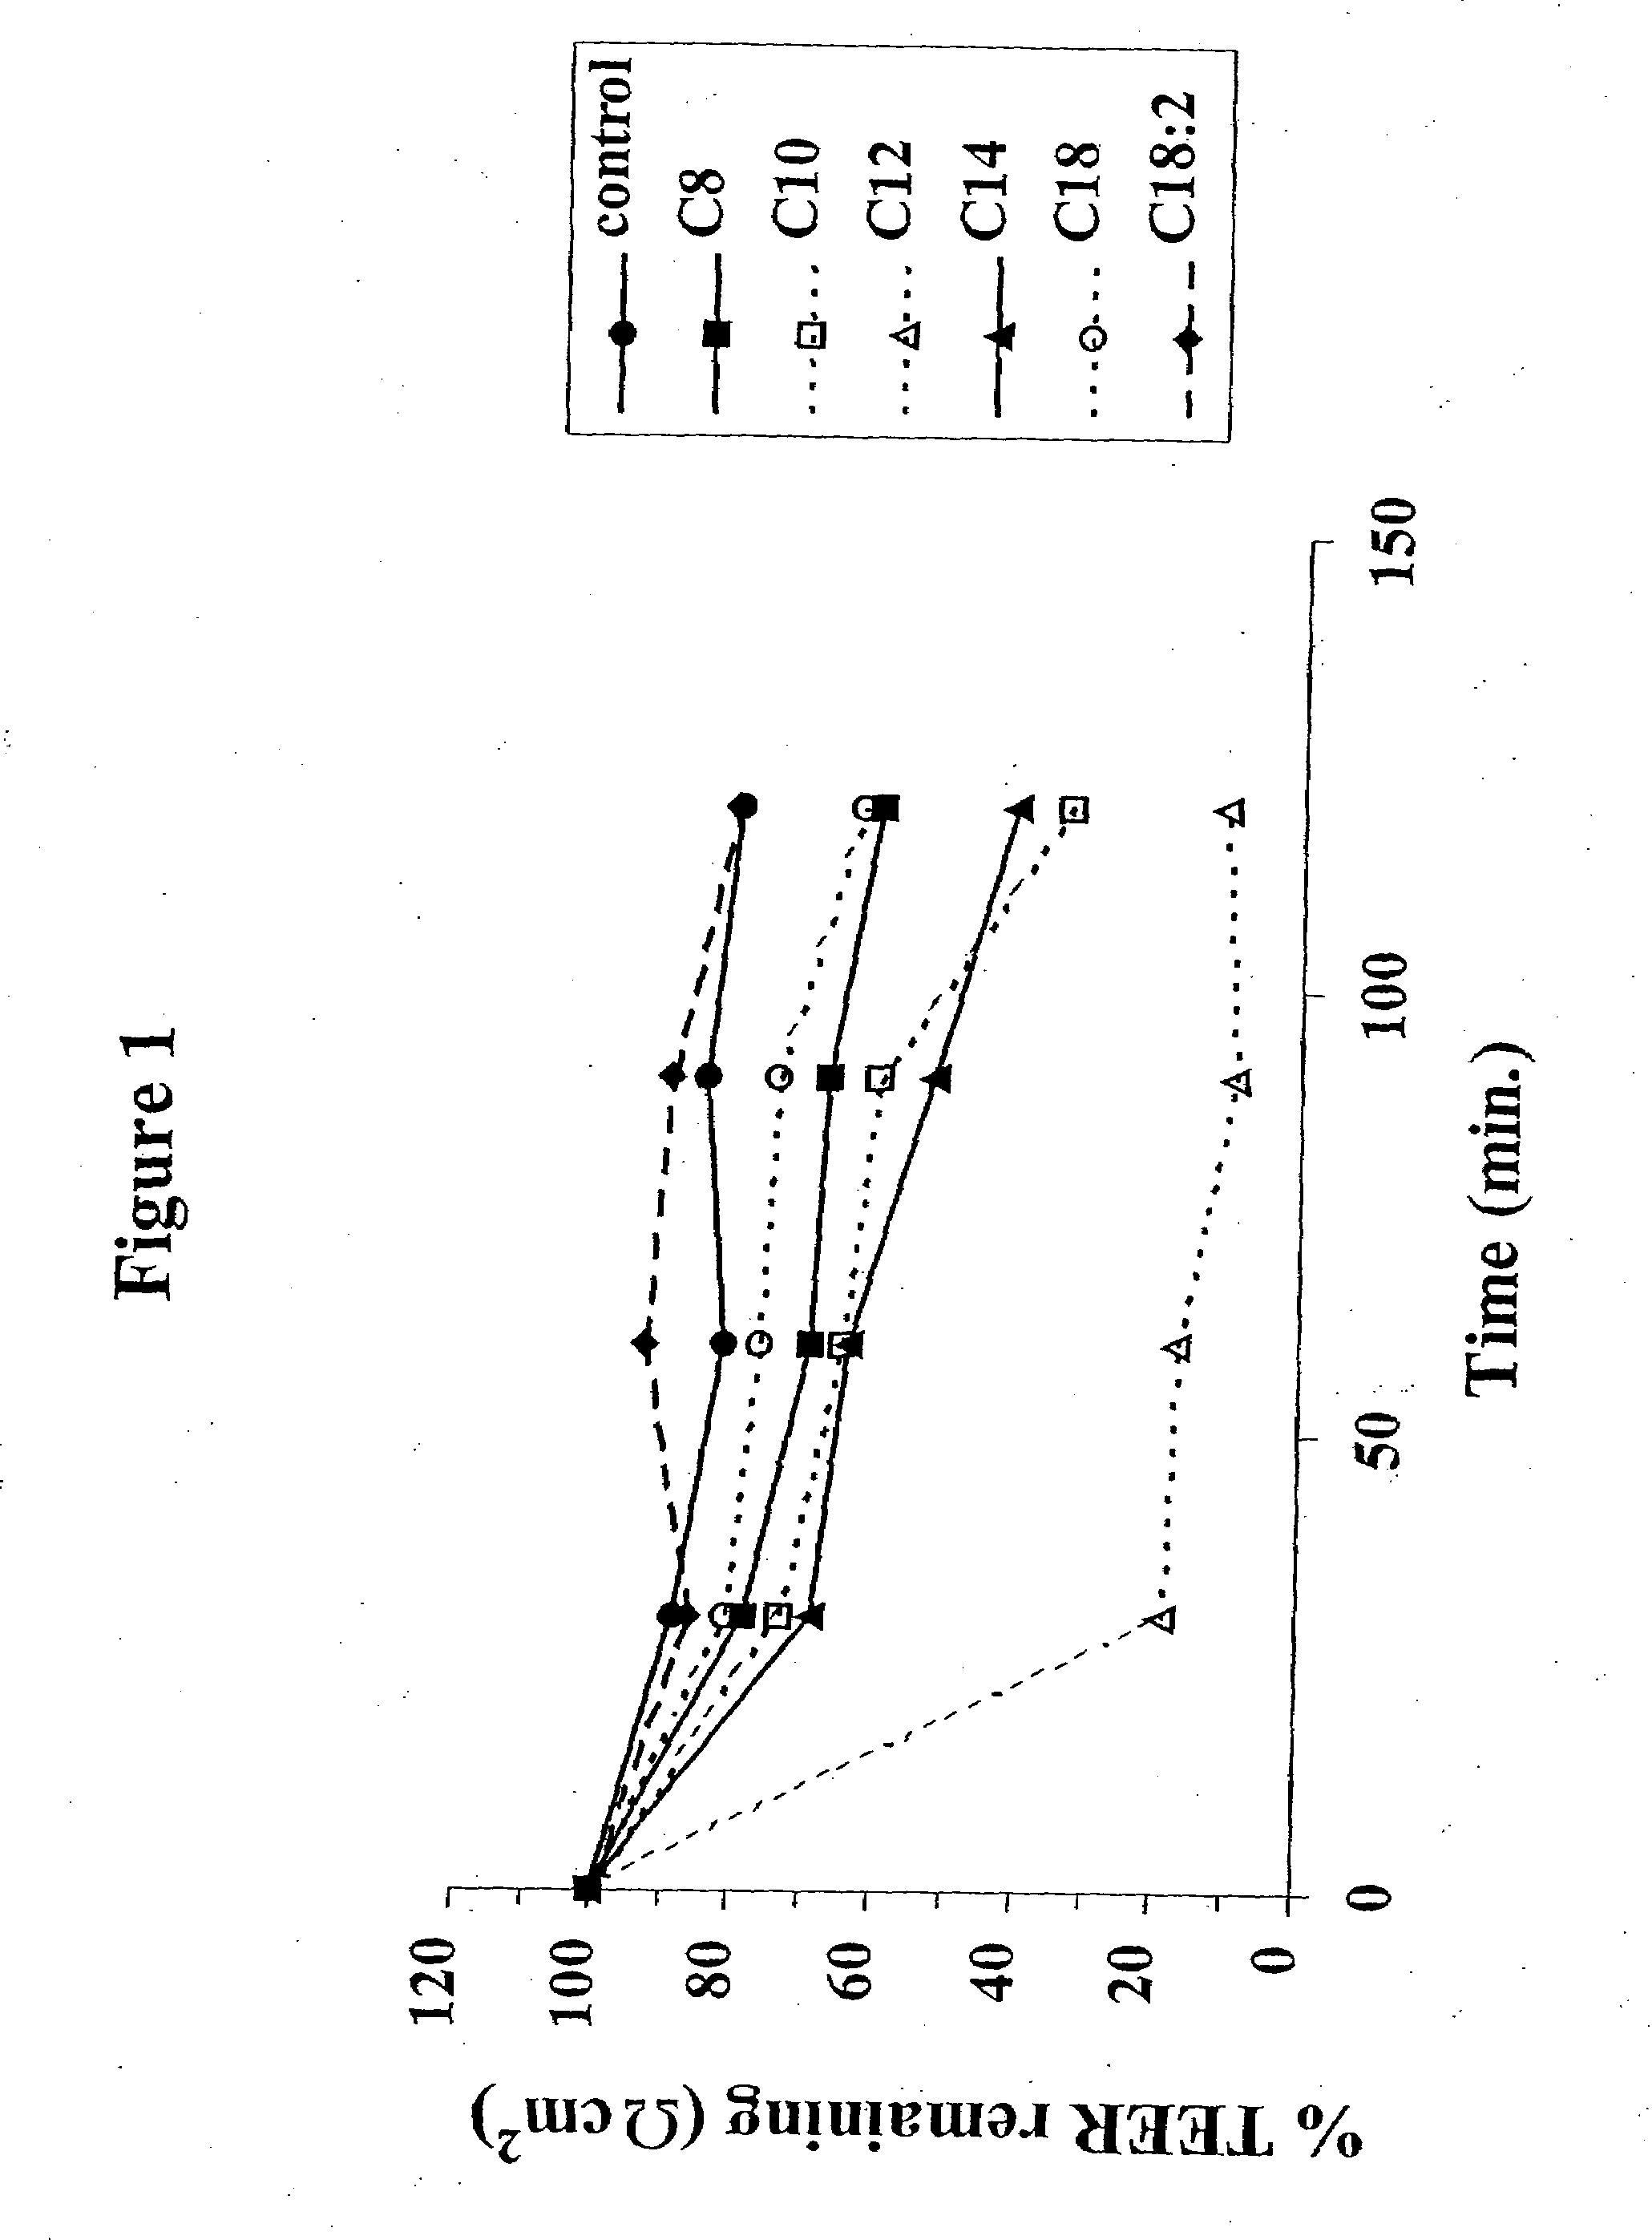 Solid Oral Dosage Form Containing an Enhancer